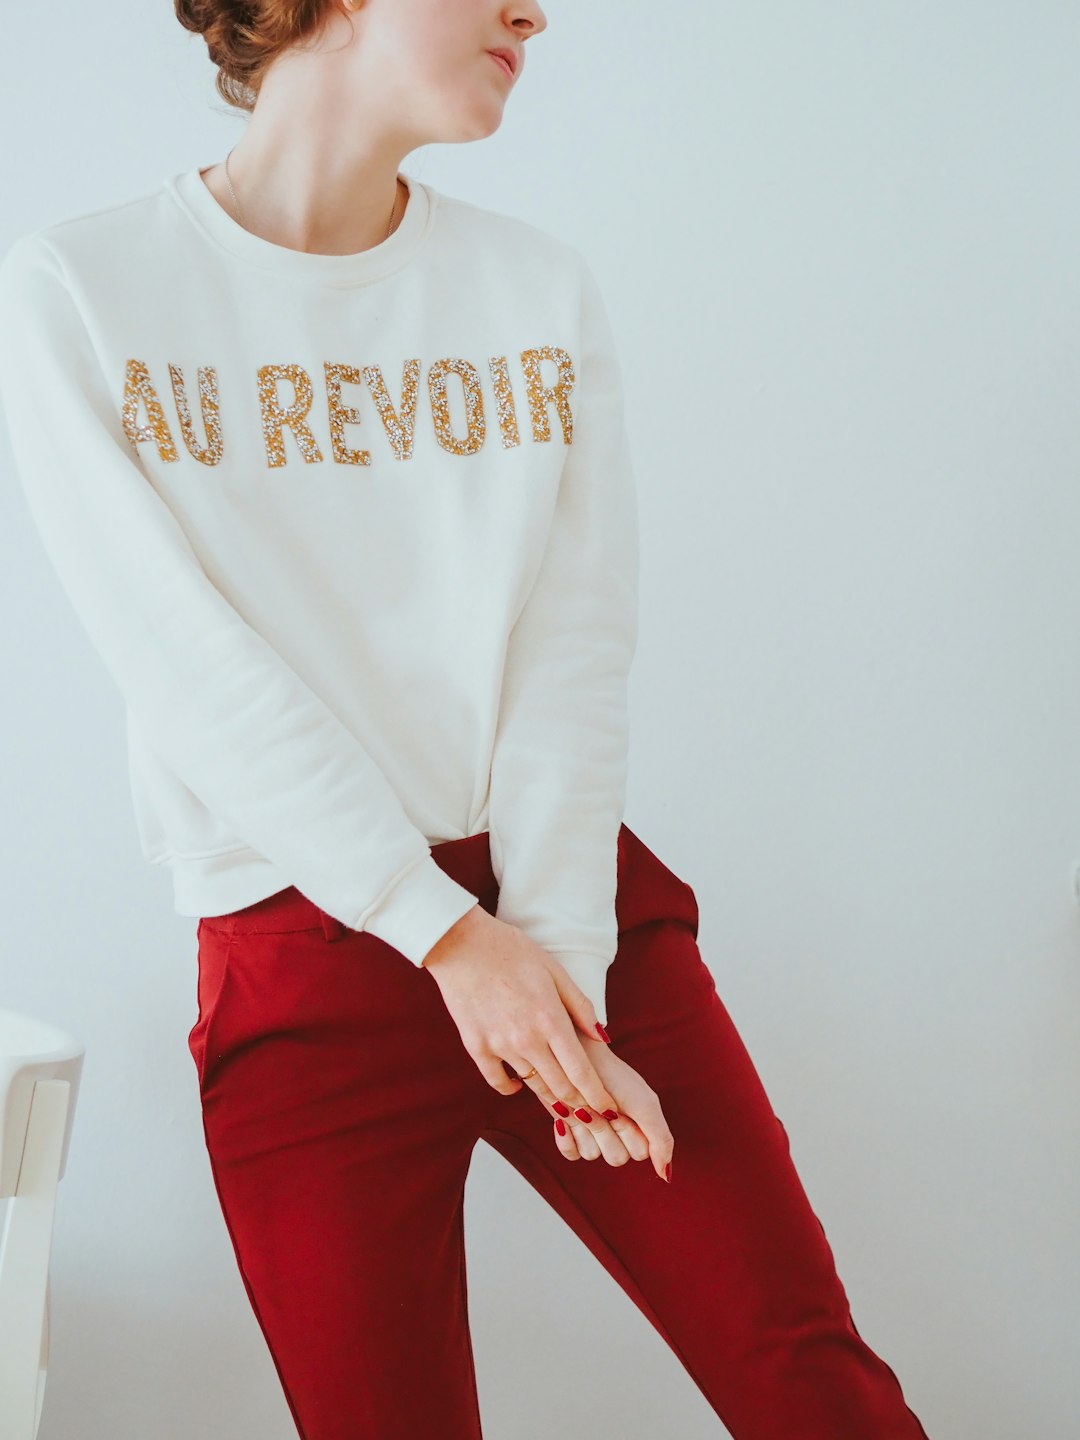 girl in white long sleeve shirt and red pants